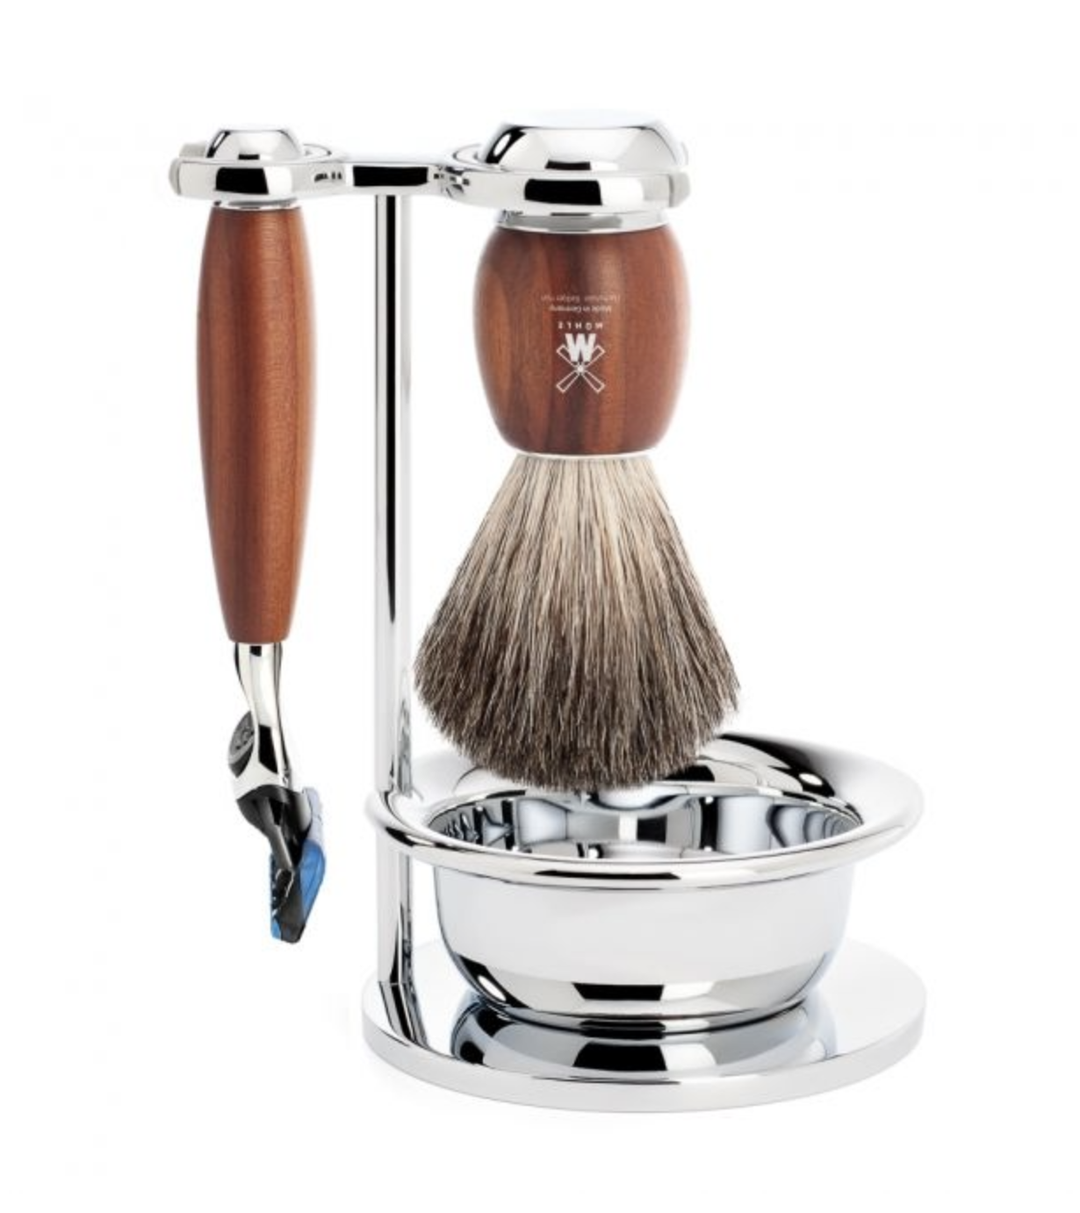 Muhle Vivo 4 Piece Shaving Set in Plum Wood | Buster McGee Daylesford